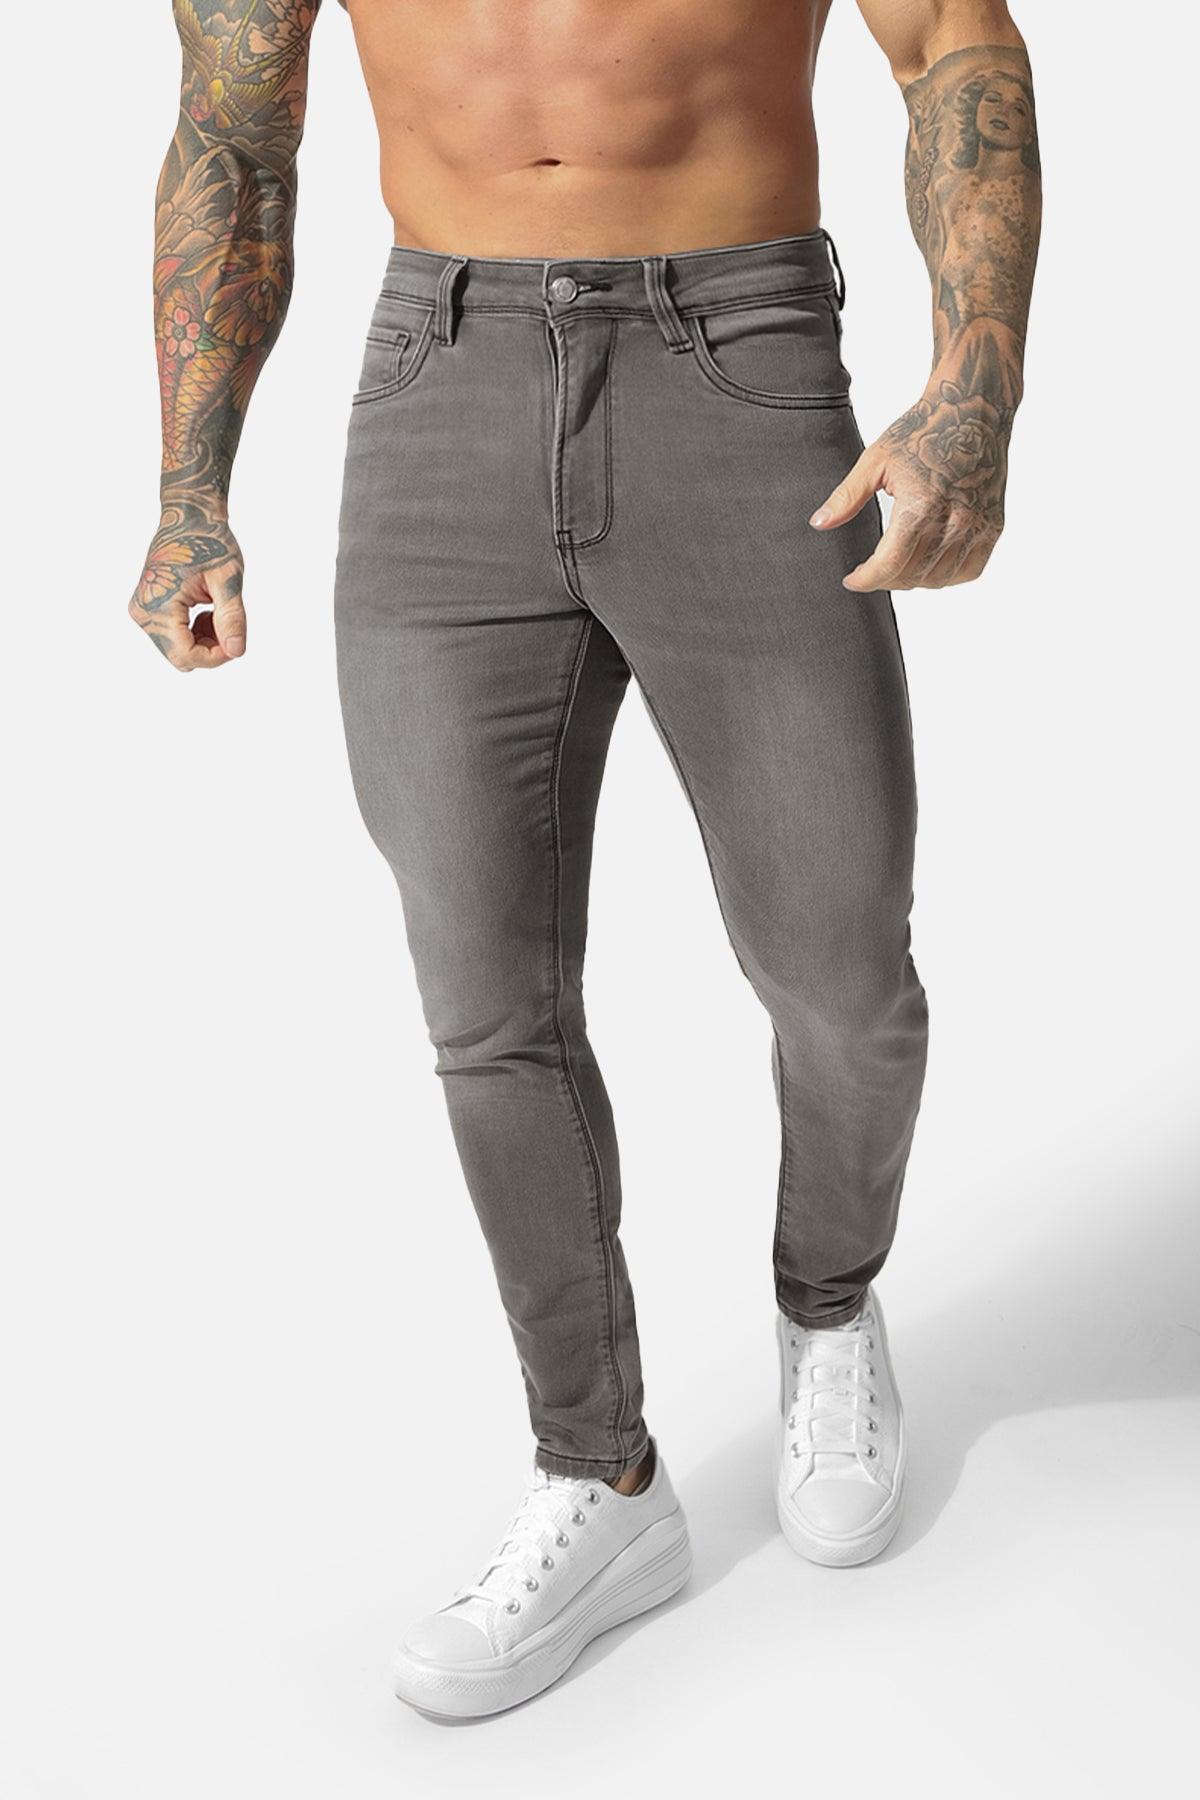 Men's Premium Fitted Stretchy Jeans - Faded Gray - Jed North Canada